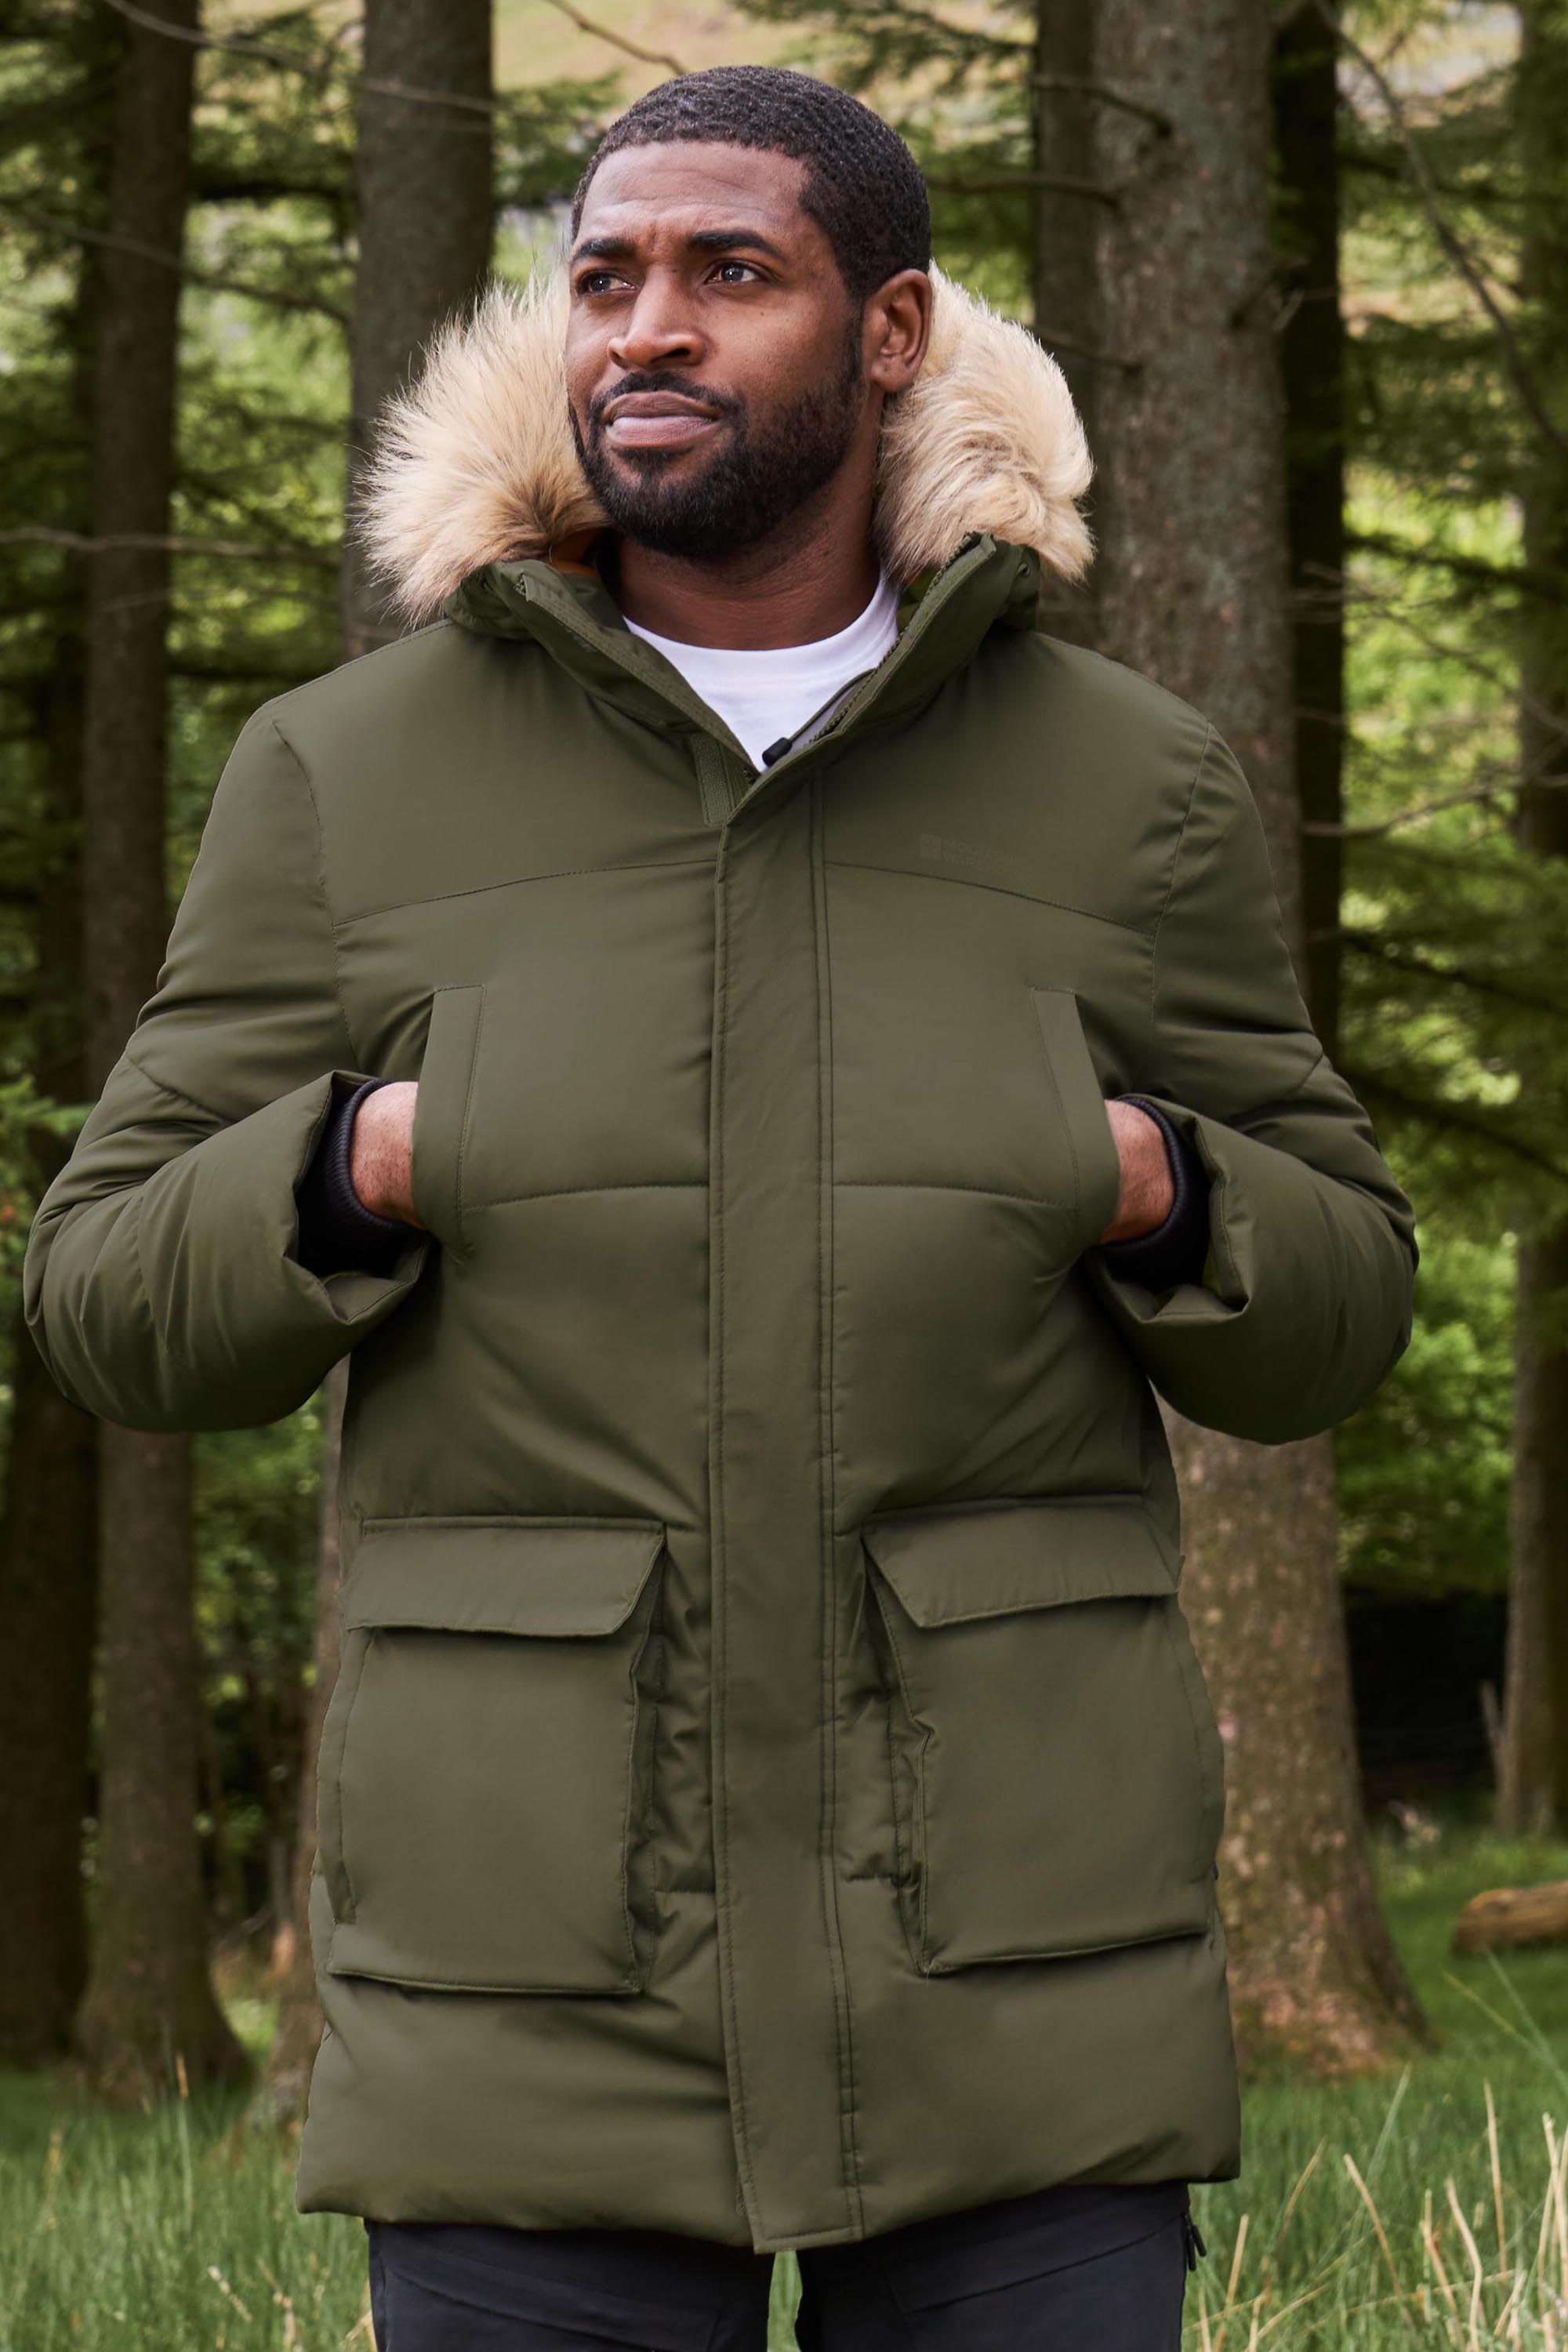 Woods Men's Kang Thermal Insulated Hooded Winter Parka Jacket Warm  Water-Resistant, Olive